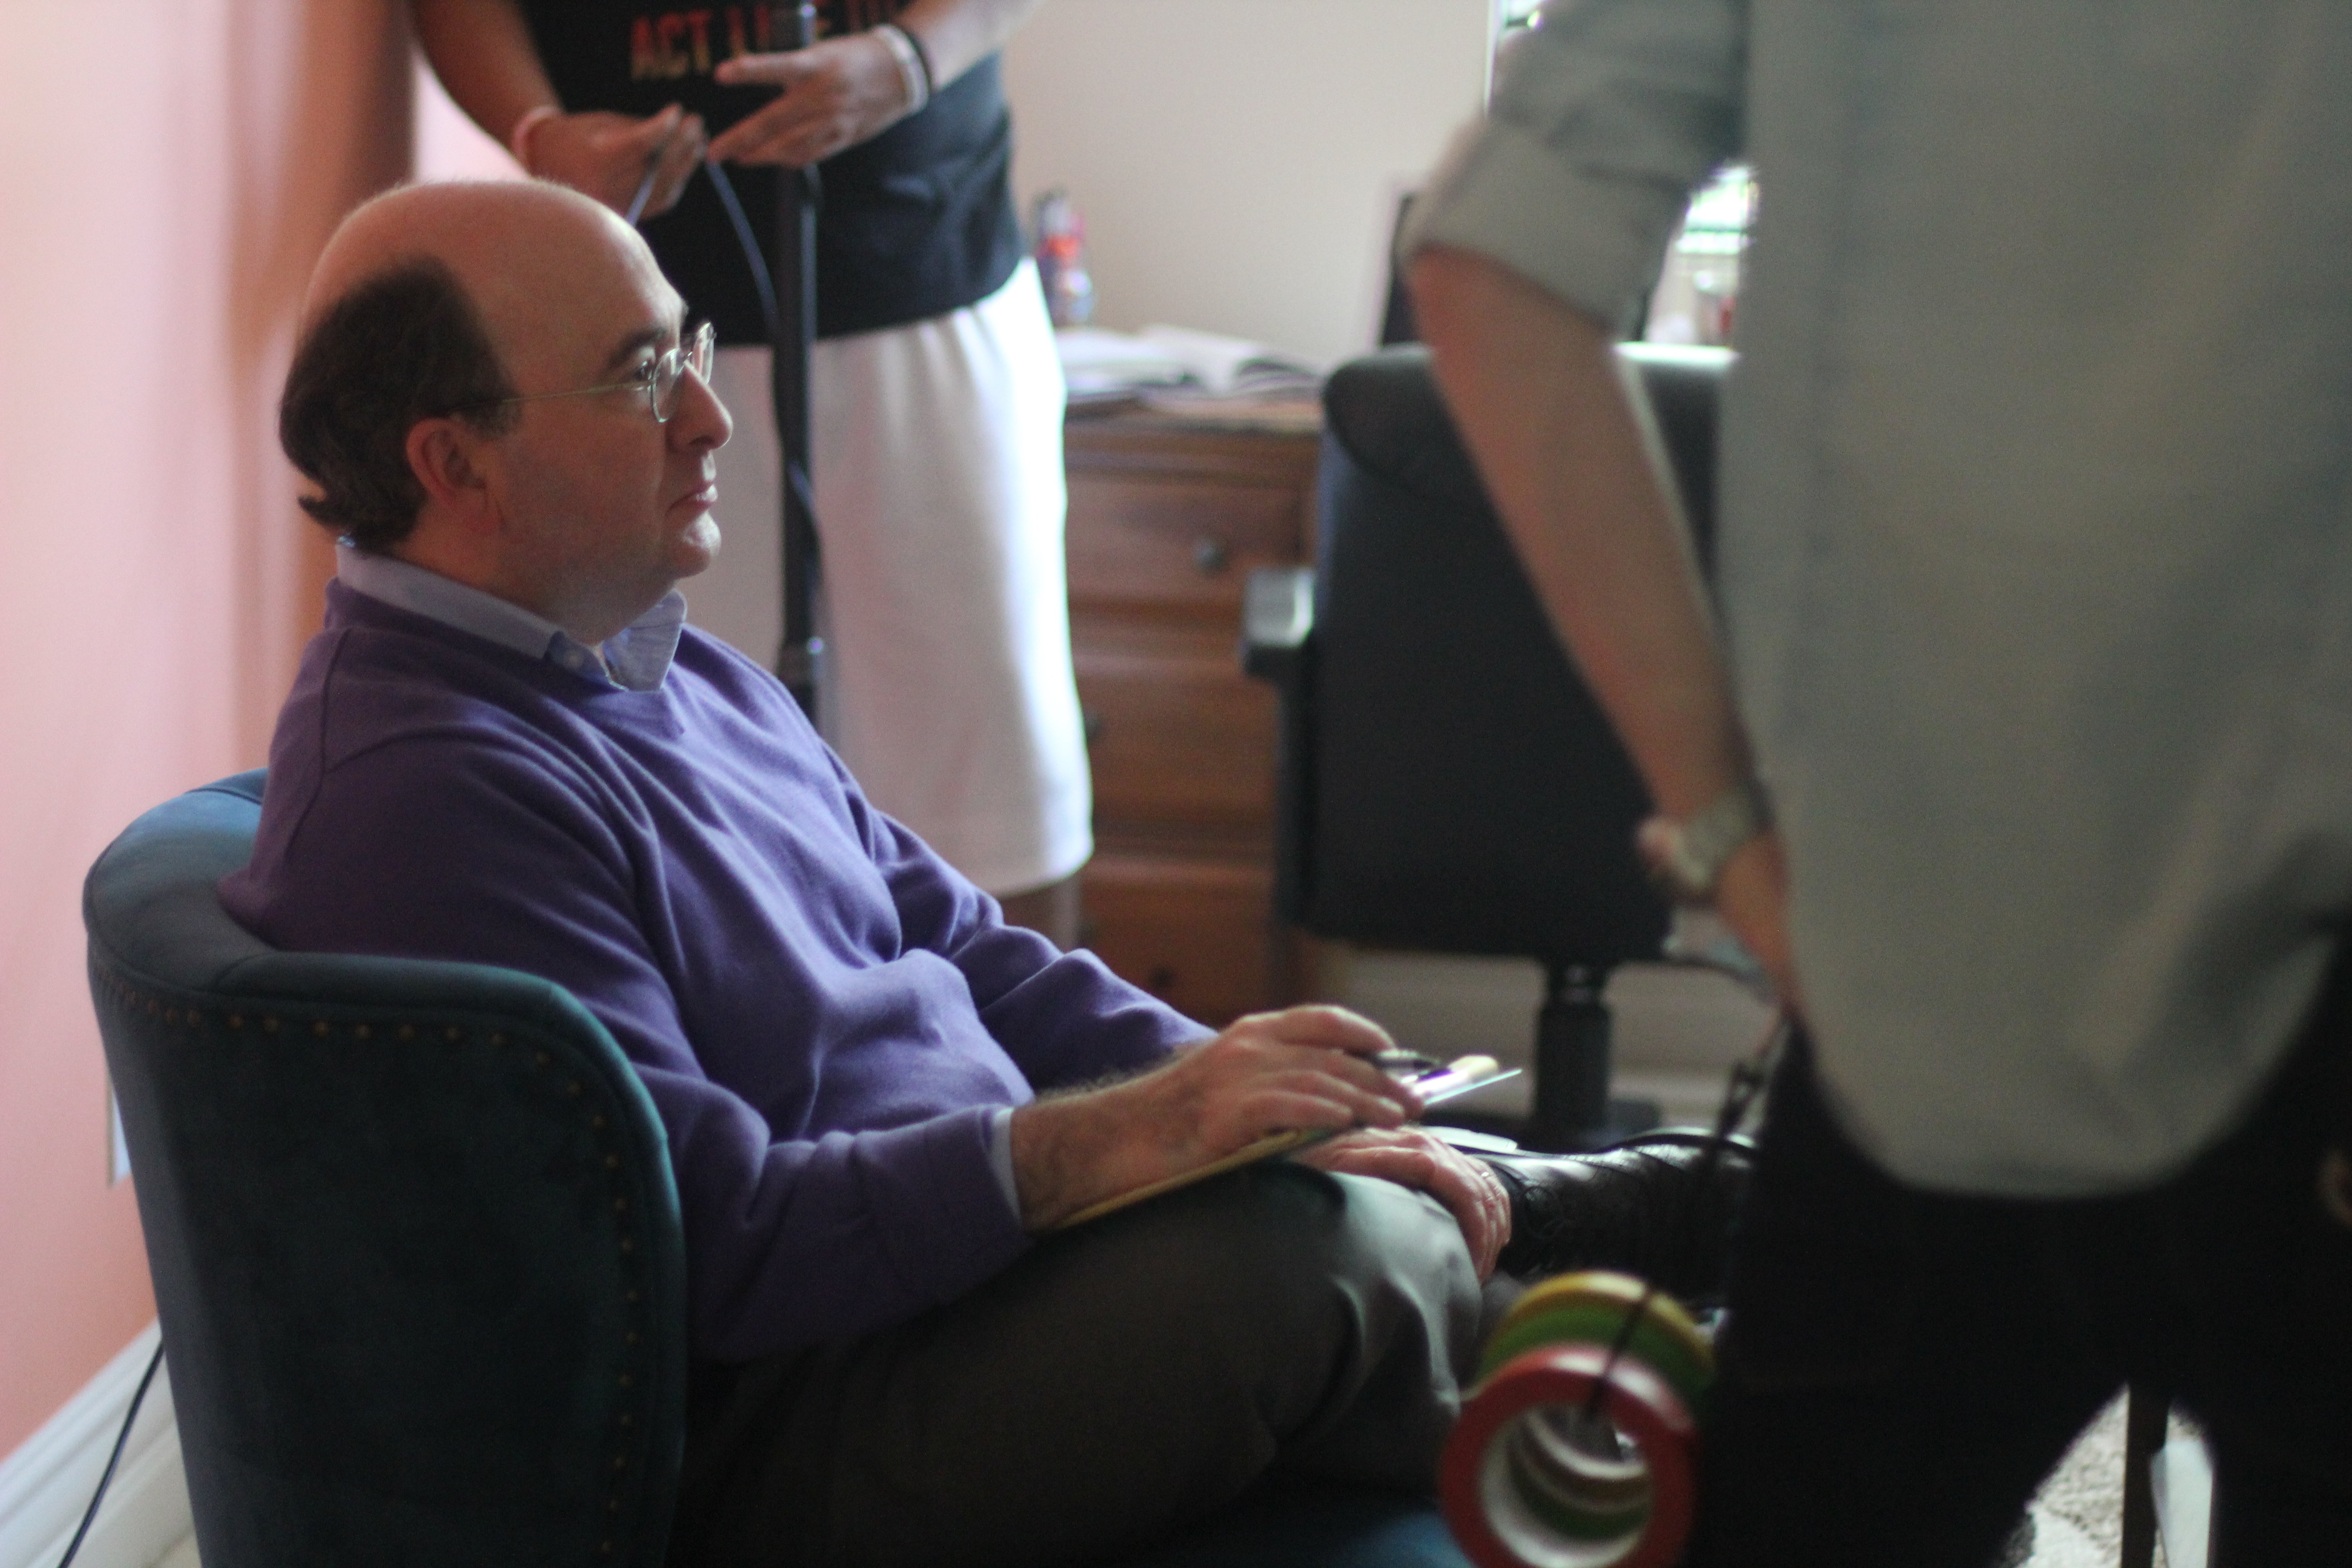 David Weisenberg on set for All of Me.